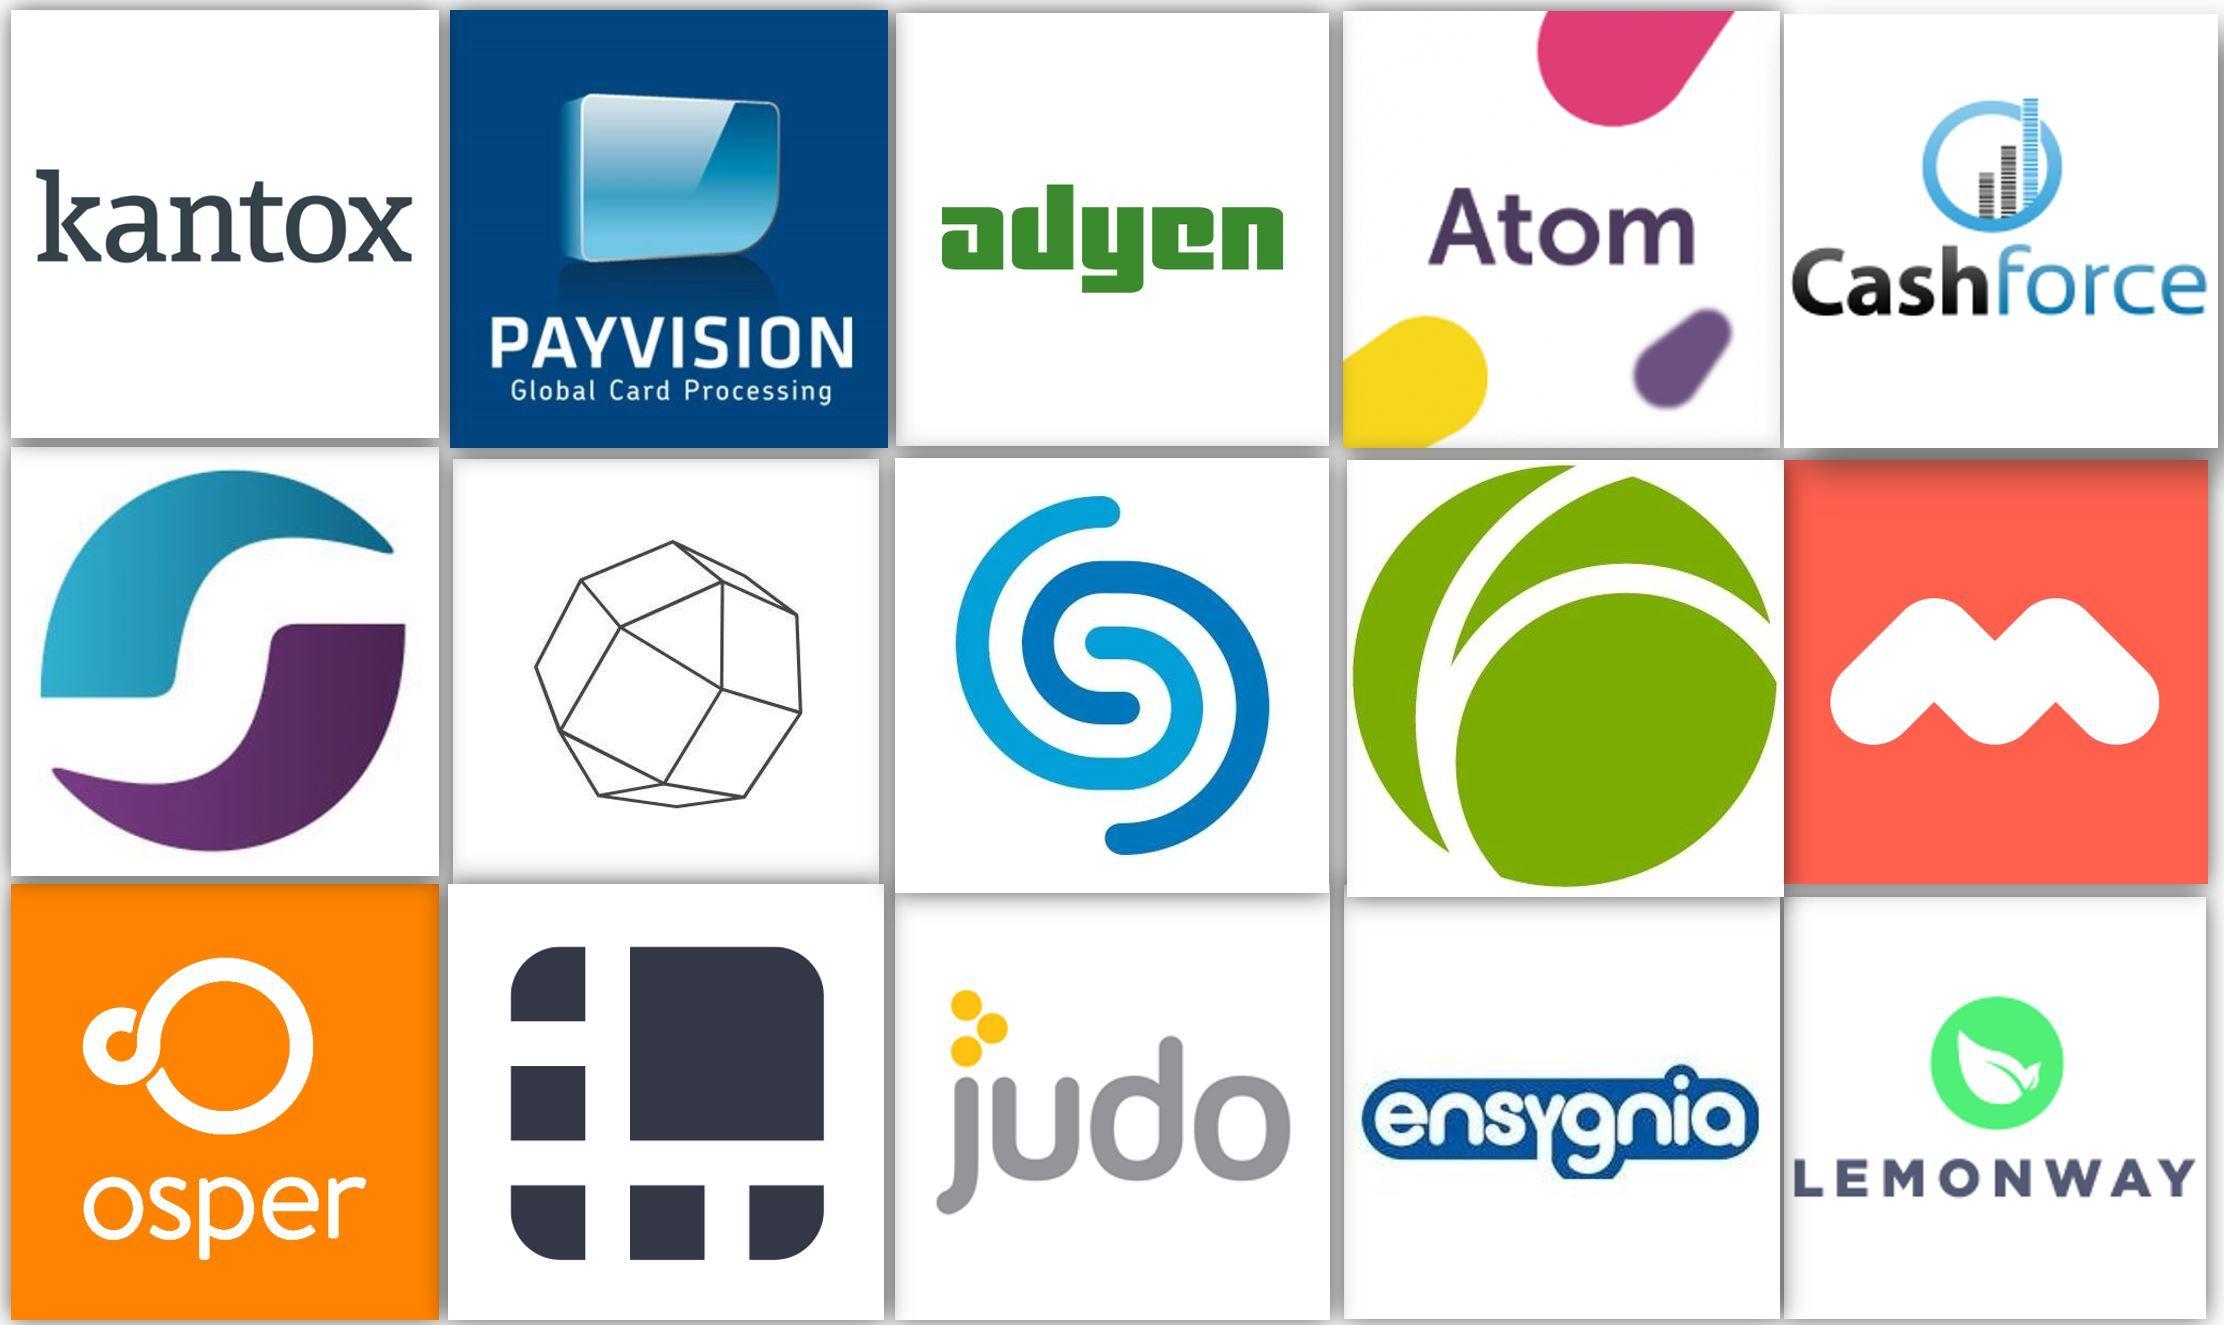 European Company Logo - 33 FinTech Companies From Western Europe to Look out for in 2016